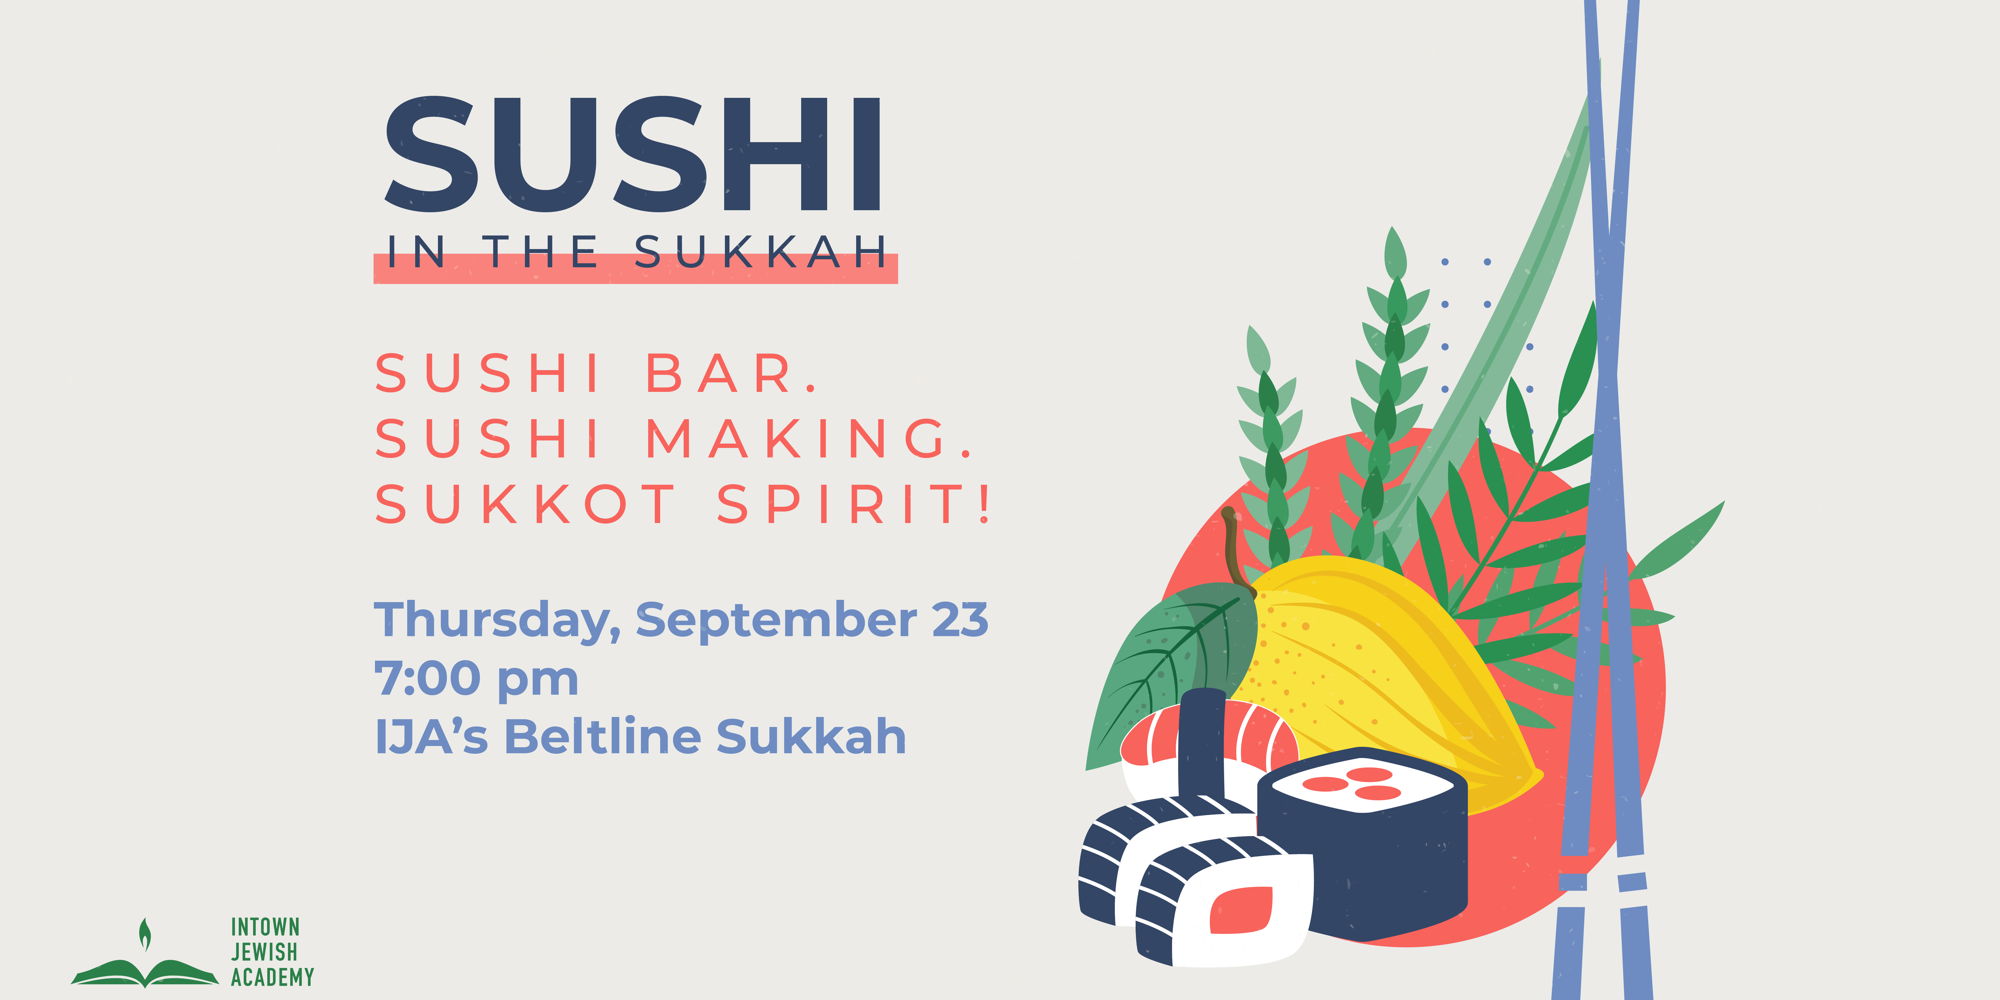 Sushi in the Sukkah promotional image